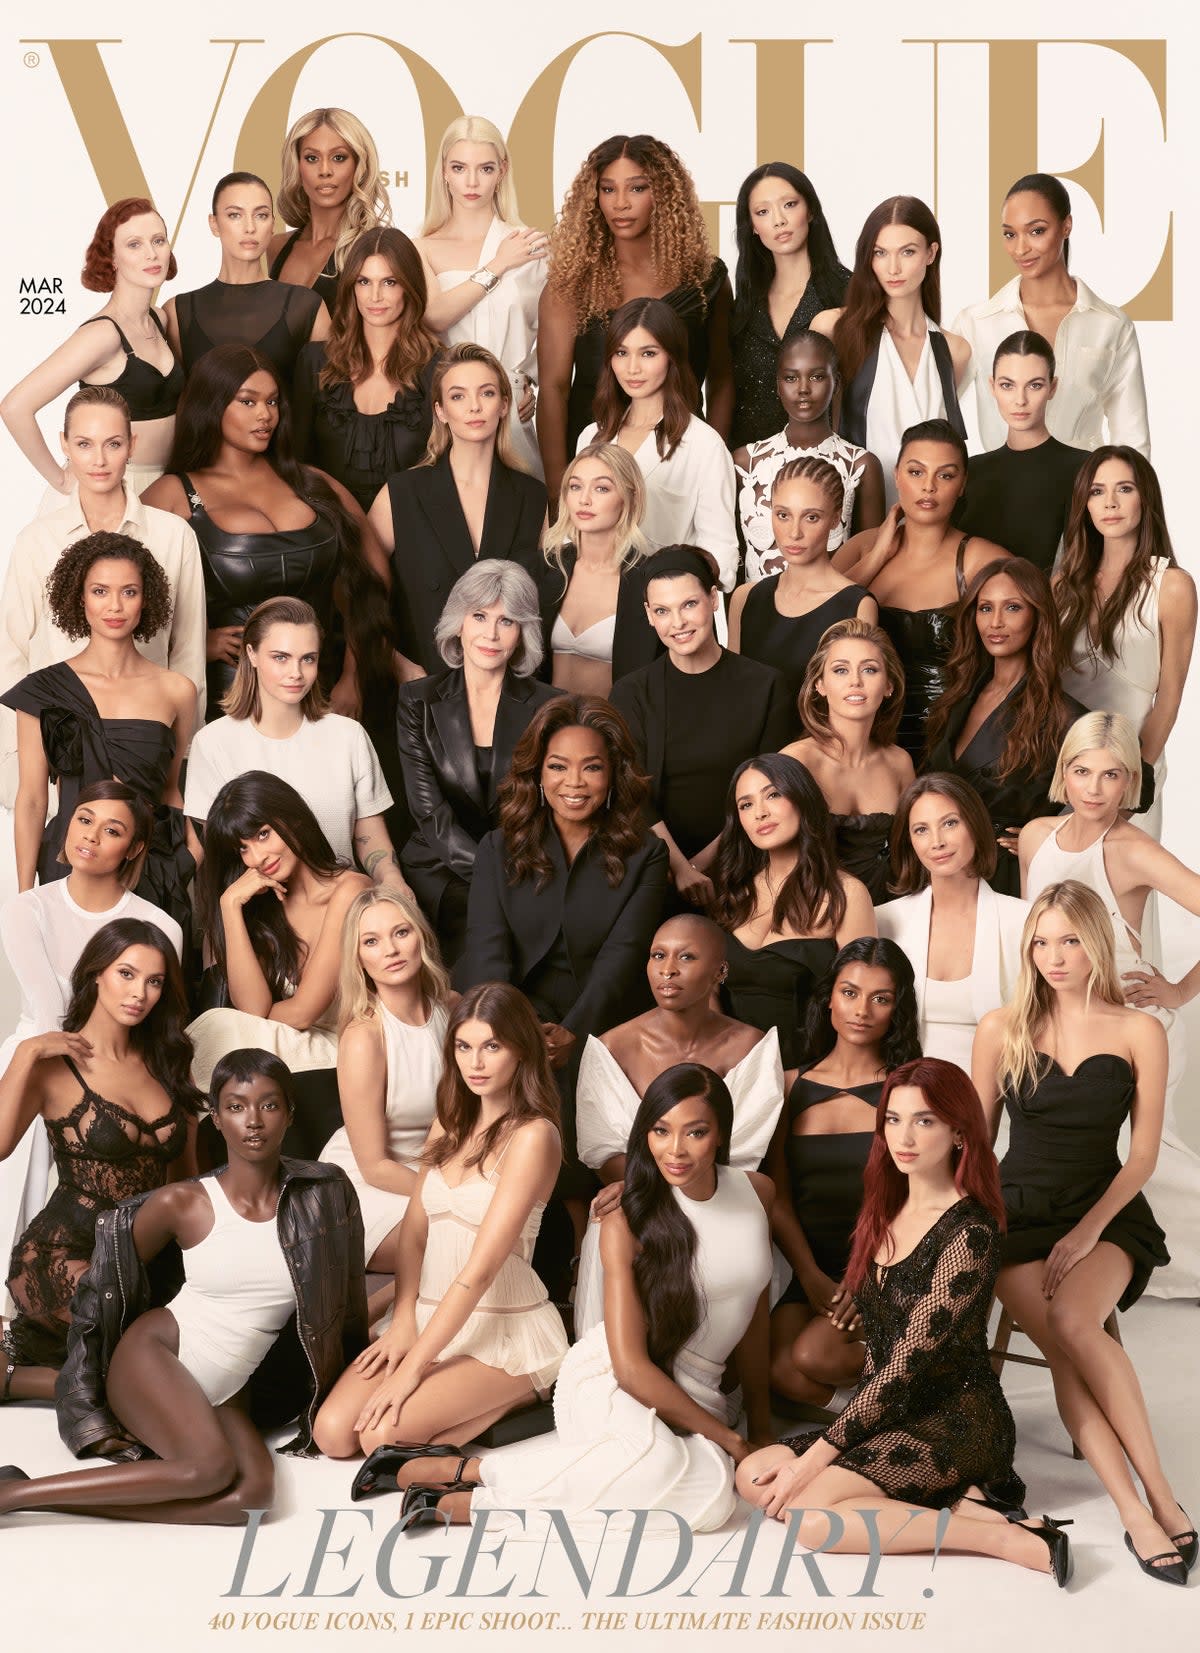 Legends Only: Cindy Crawford, Jodie Comer and Cynthia Erivo among the 40 women featured in Enninful’s last cover (Steven Meisel / British Vogue)